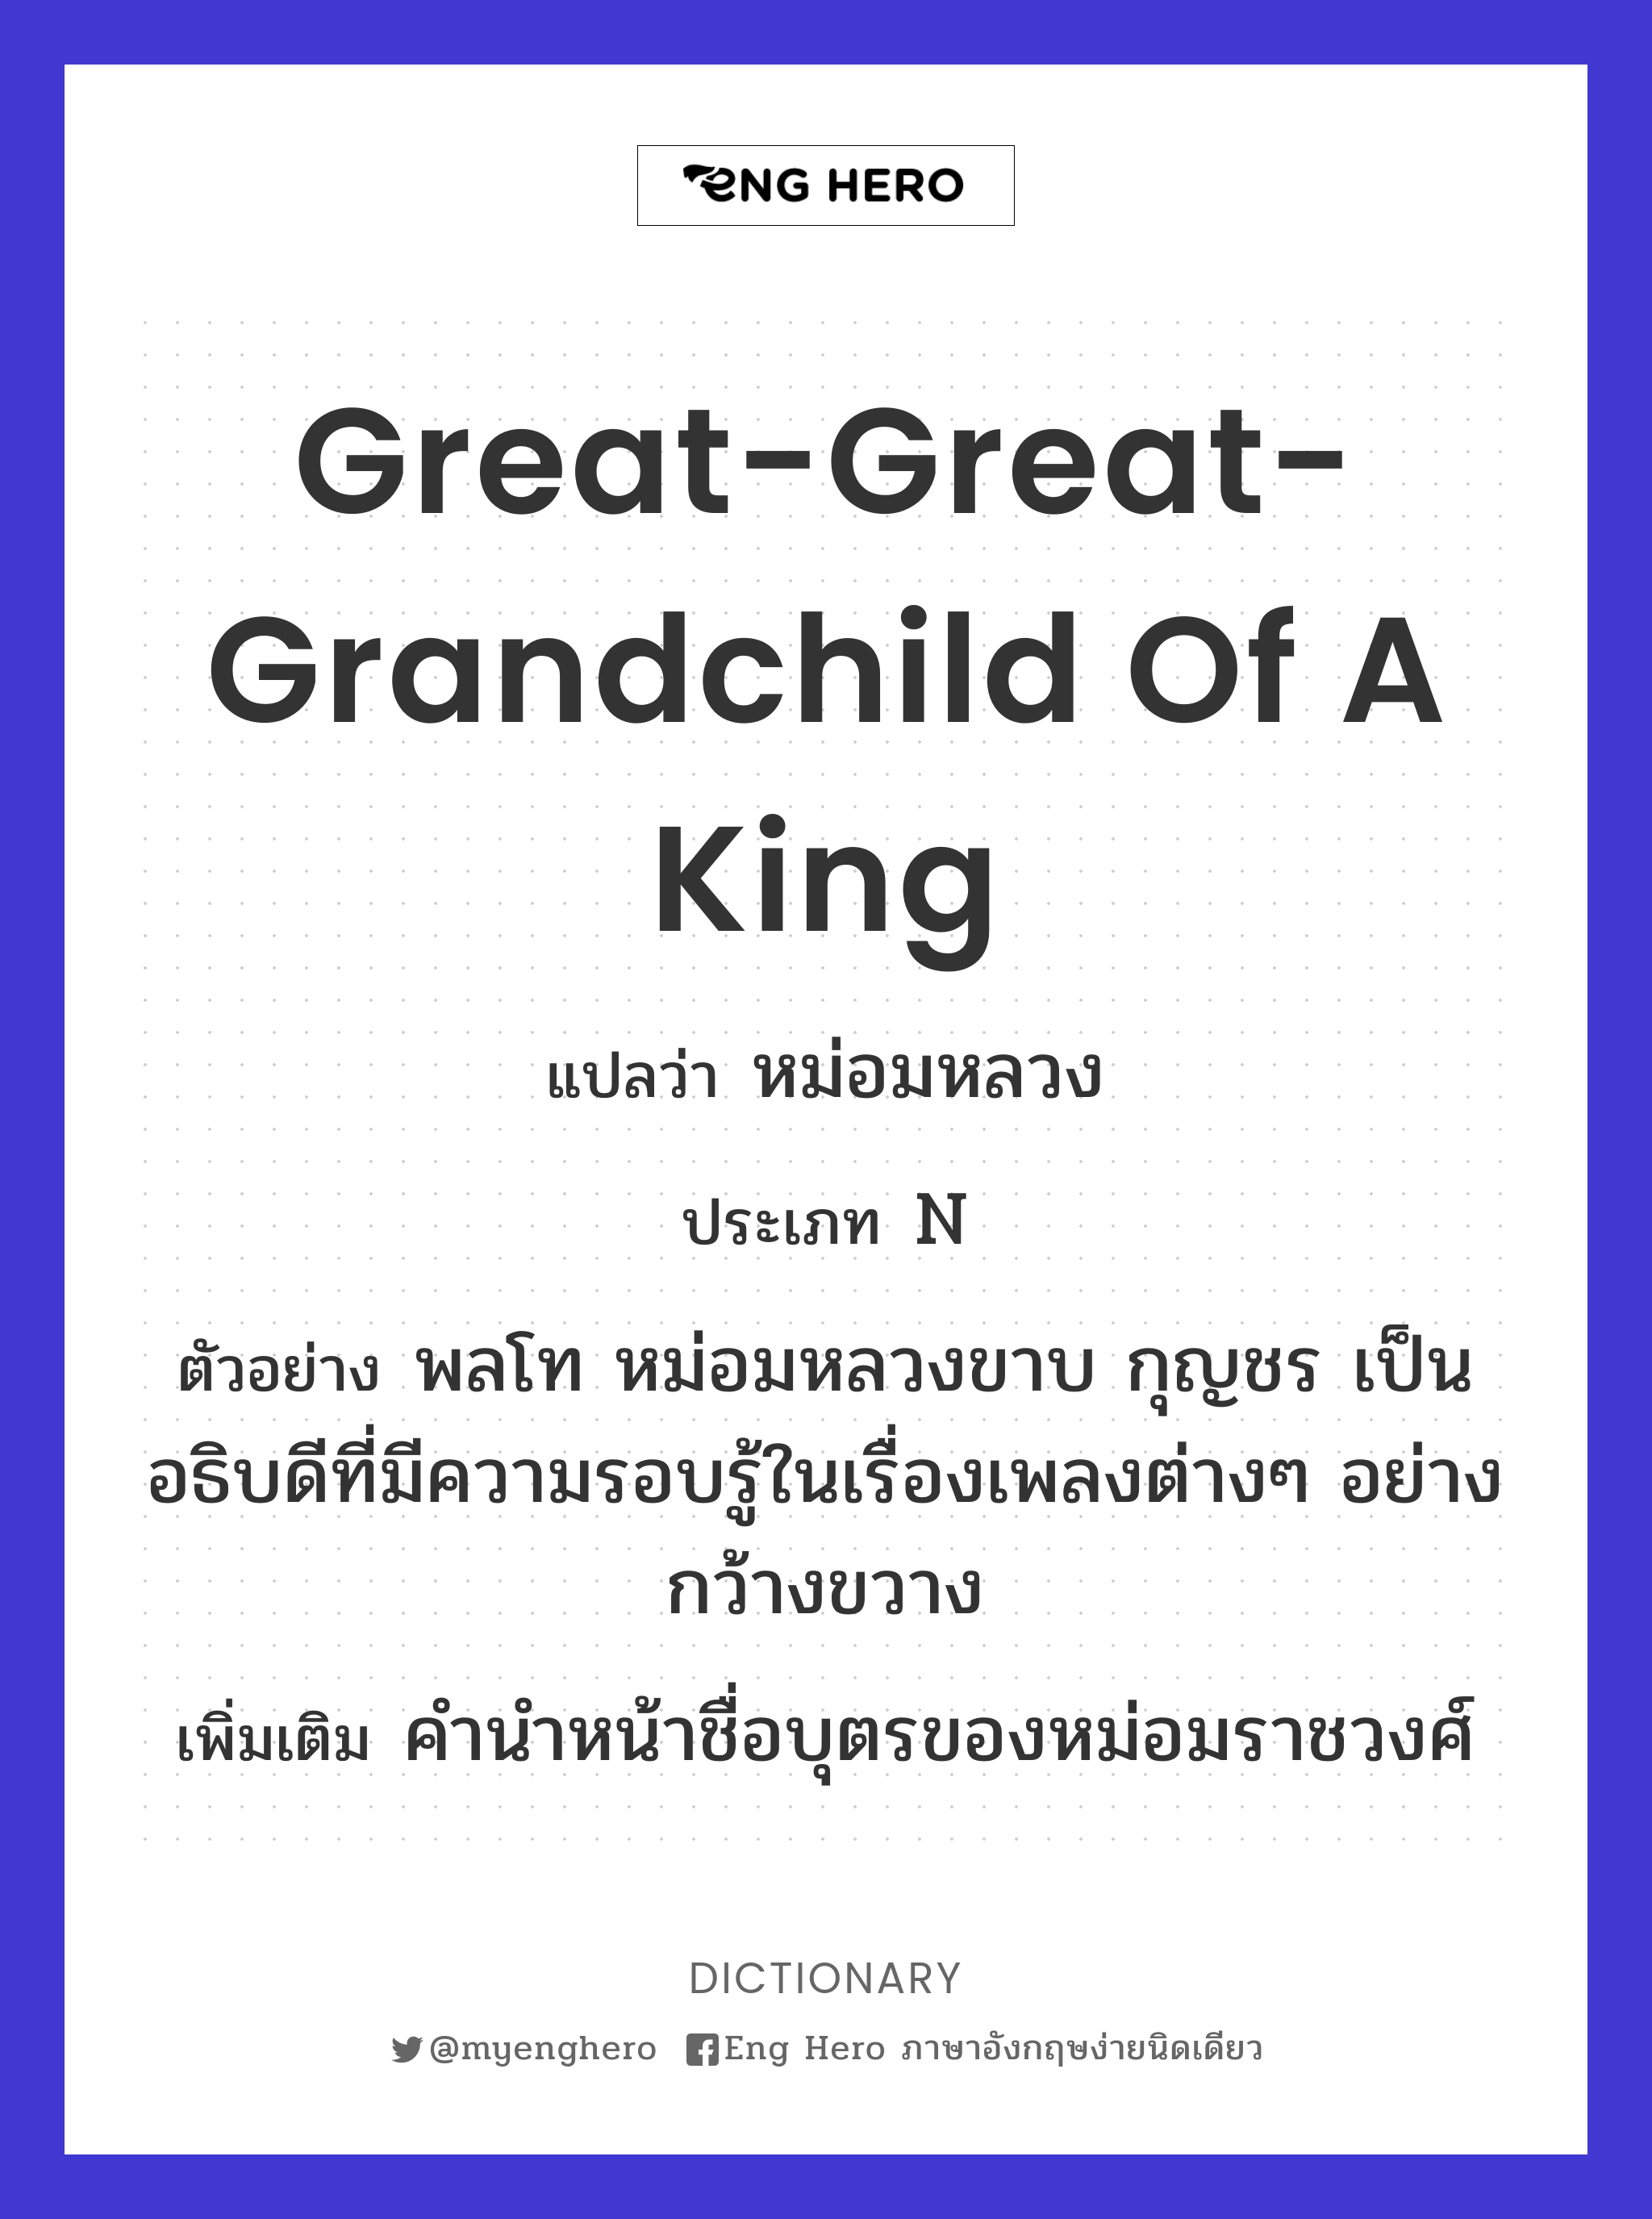 great-great-grandchild of a king